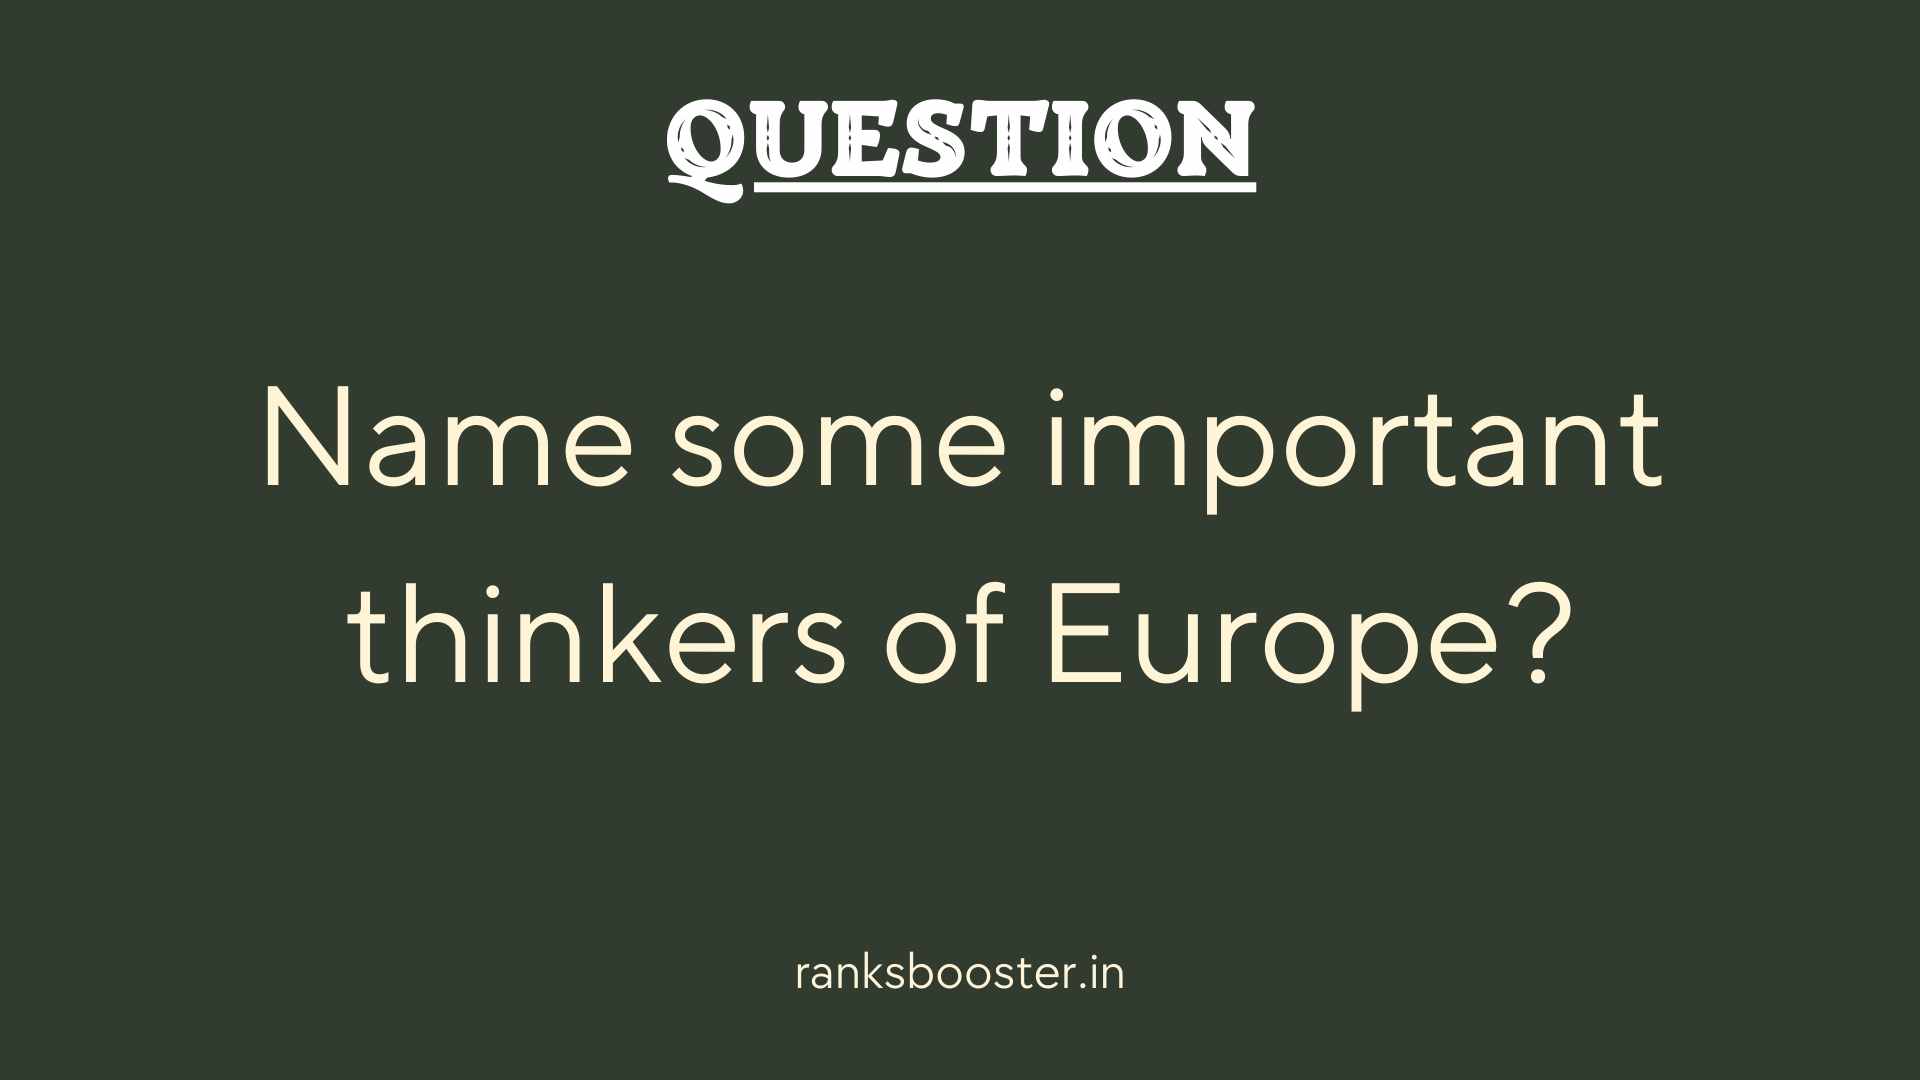 Question: Name some important thinkers of Europe?